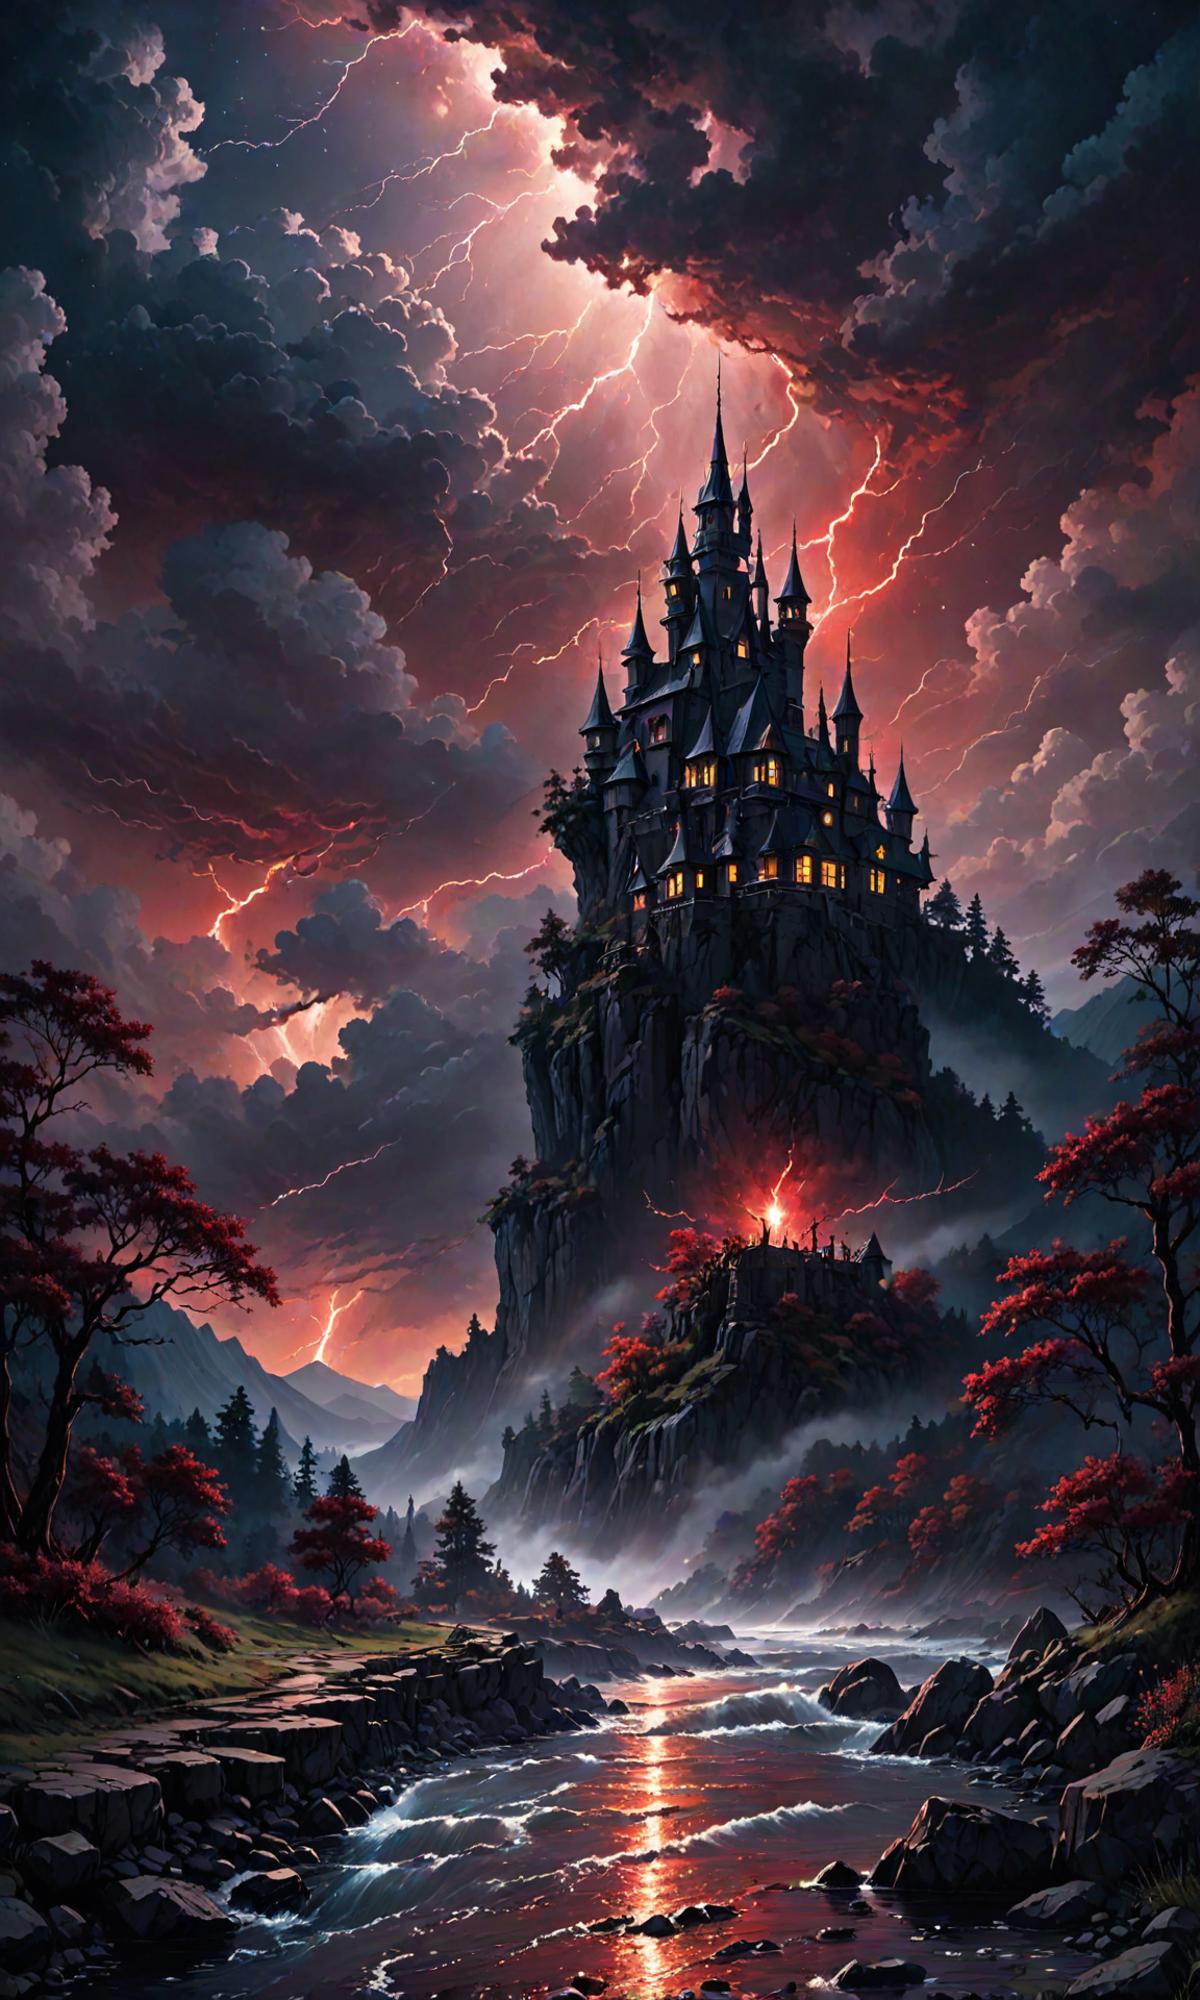 Castle Illustration With Red Sky and Lightning Bolt - Artwork of a grand castle atop a hill.